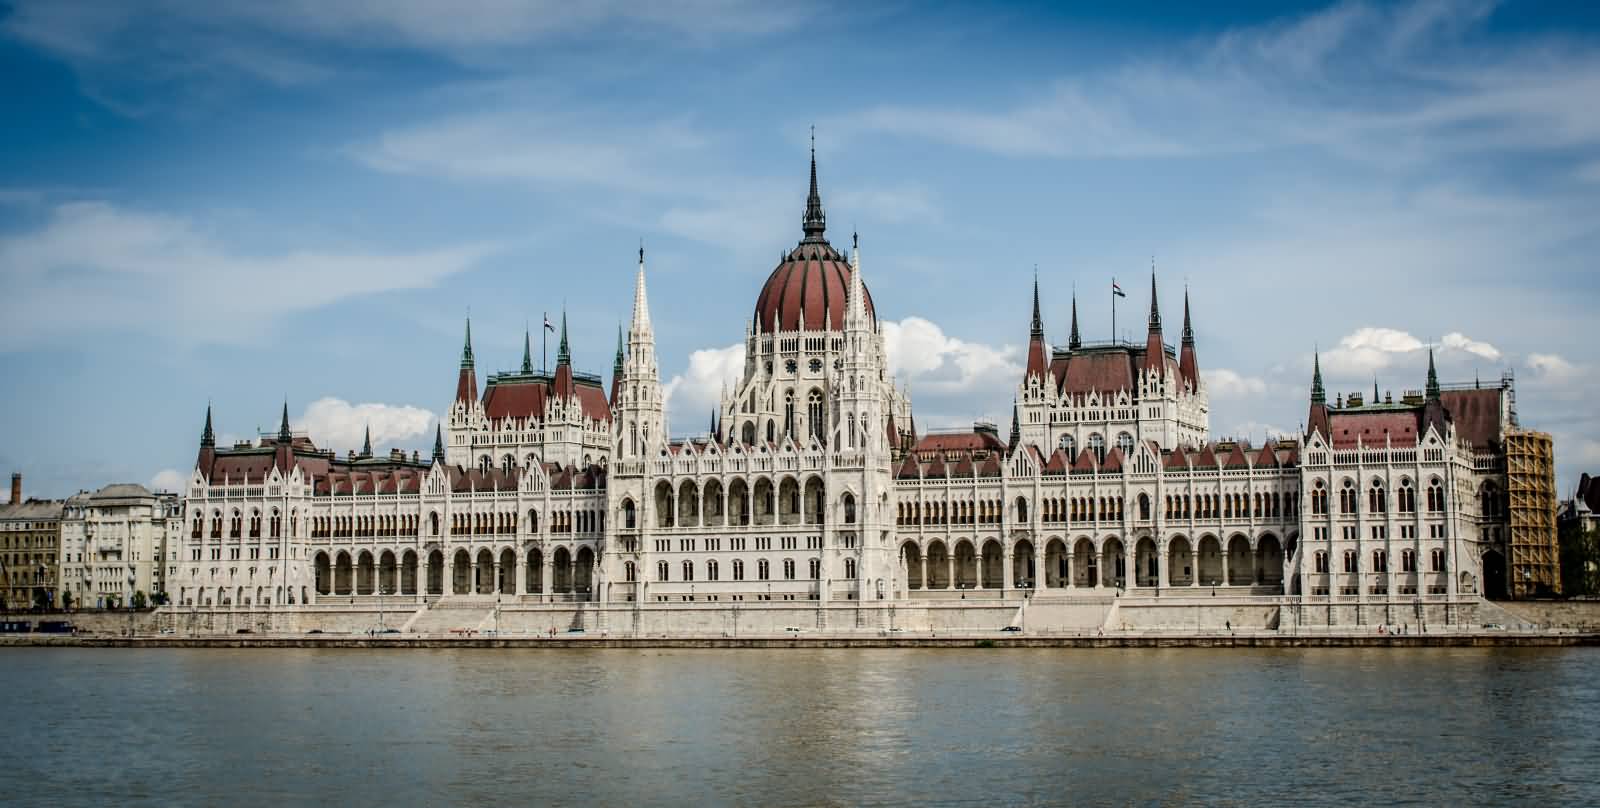 The Hungarian Parliament Building Image